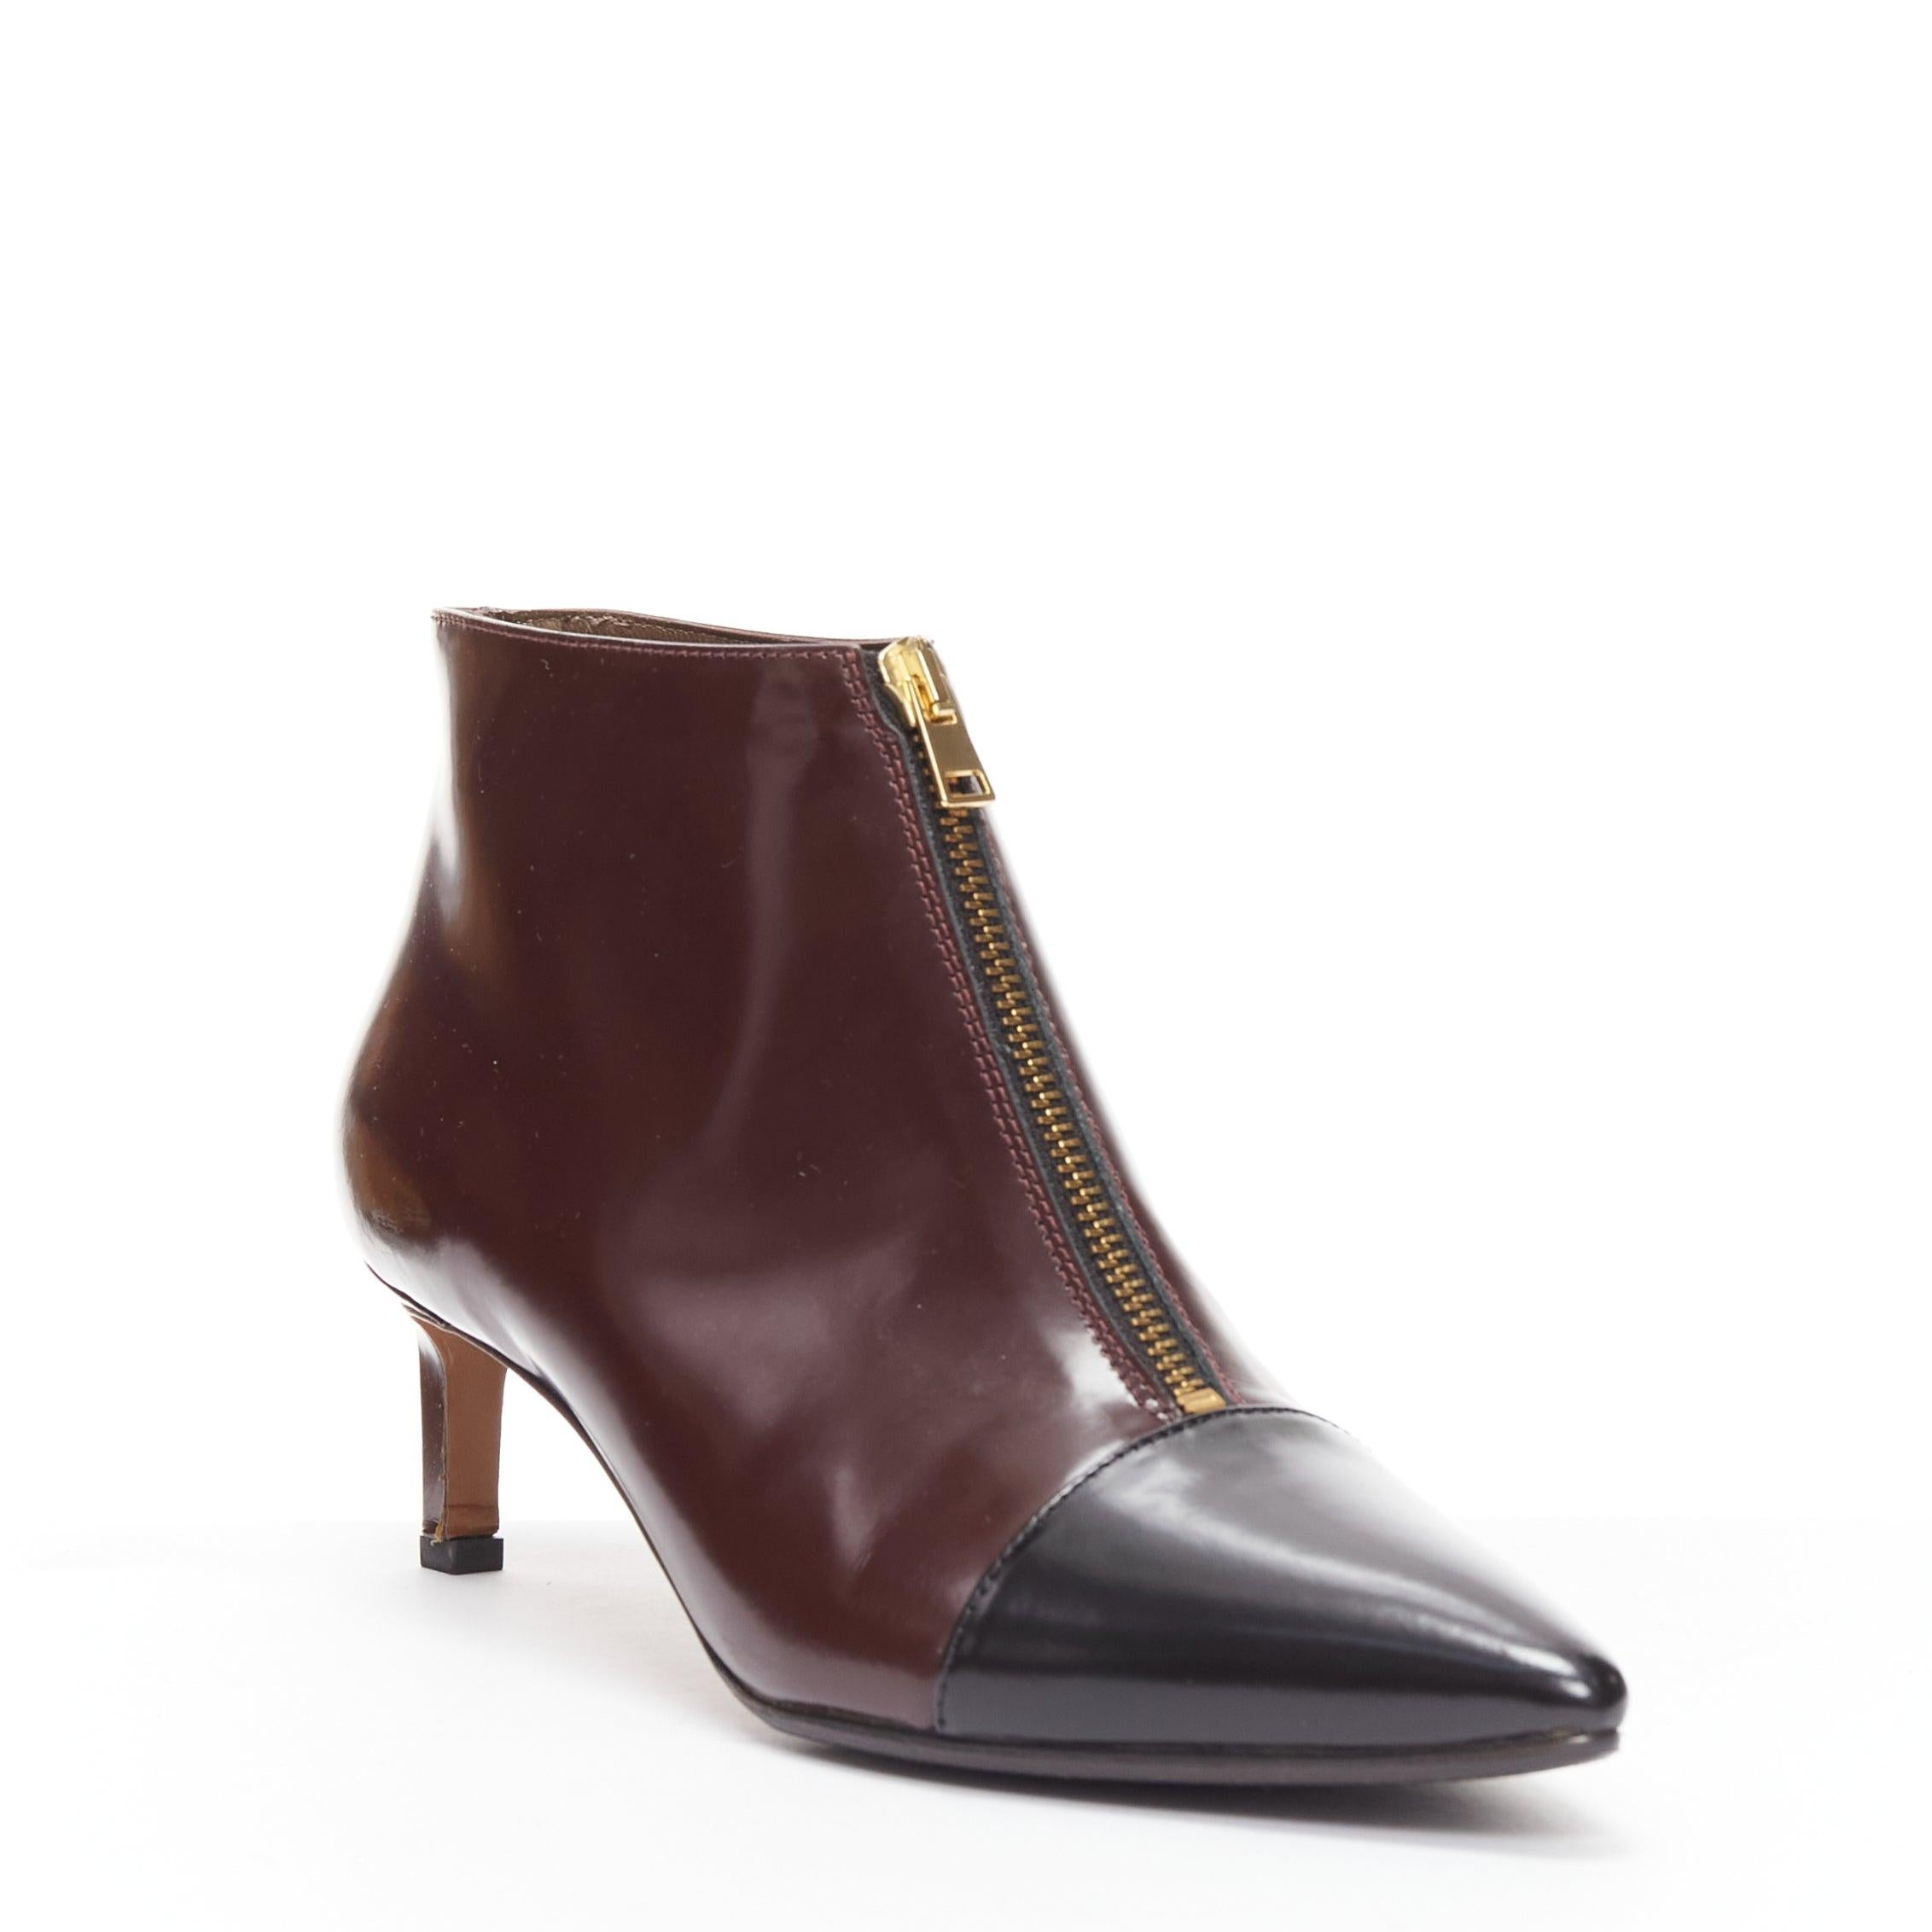 MARNI dark brown black toe cap kitten heel zip front bootie EU37
Reference: CELG/A00367
Brand: Marni
Material: Leather
Color: Brown, Black
Pattern: Solid
Closure: Zip
Lining: Brown Leather
Made in: Italy

CONDITION:
Condition: Very good, this item